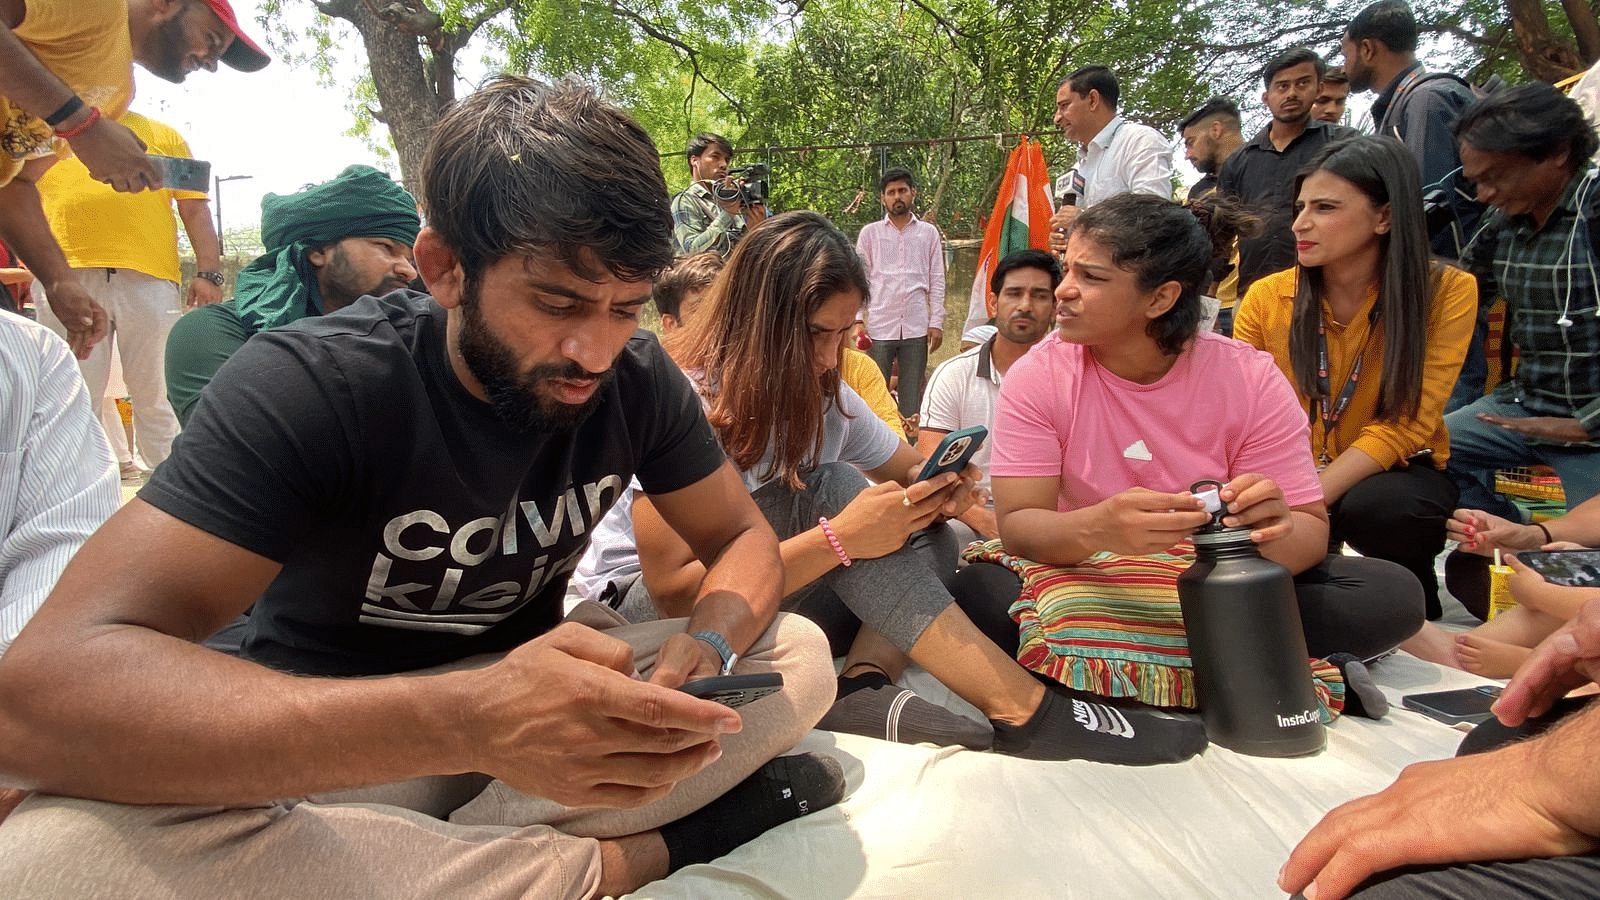 <div class="paragraphs"><p>The wrestlers continued their dharna in New Delhi's Jantar Mantar, protesting against the sidelined WFI chief, Brij Bhushan Sharan Singh.</p></div>